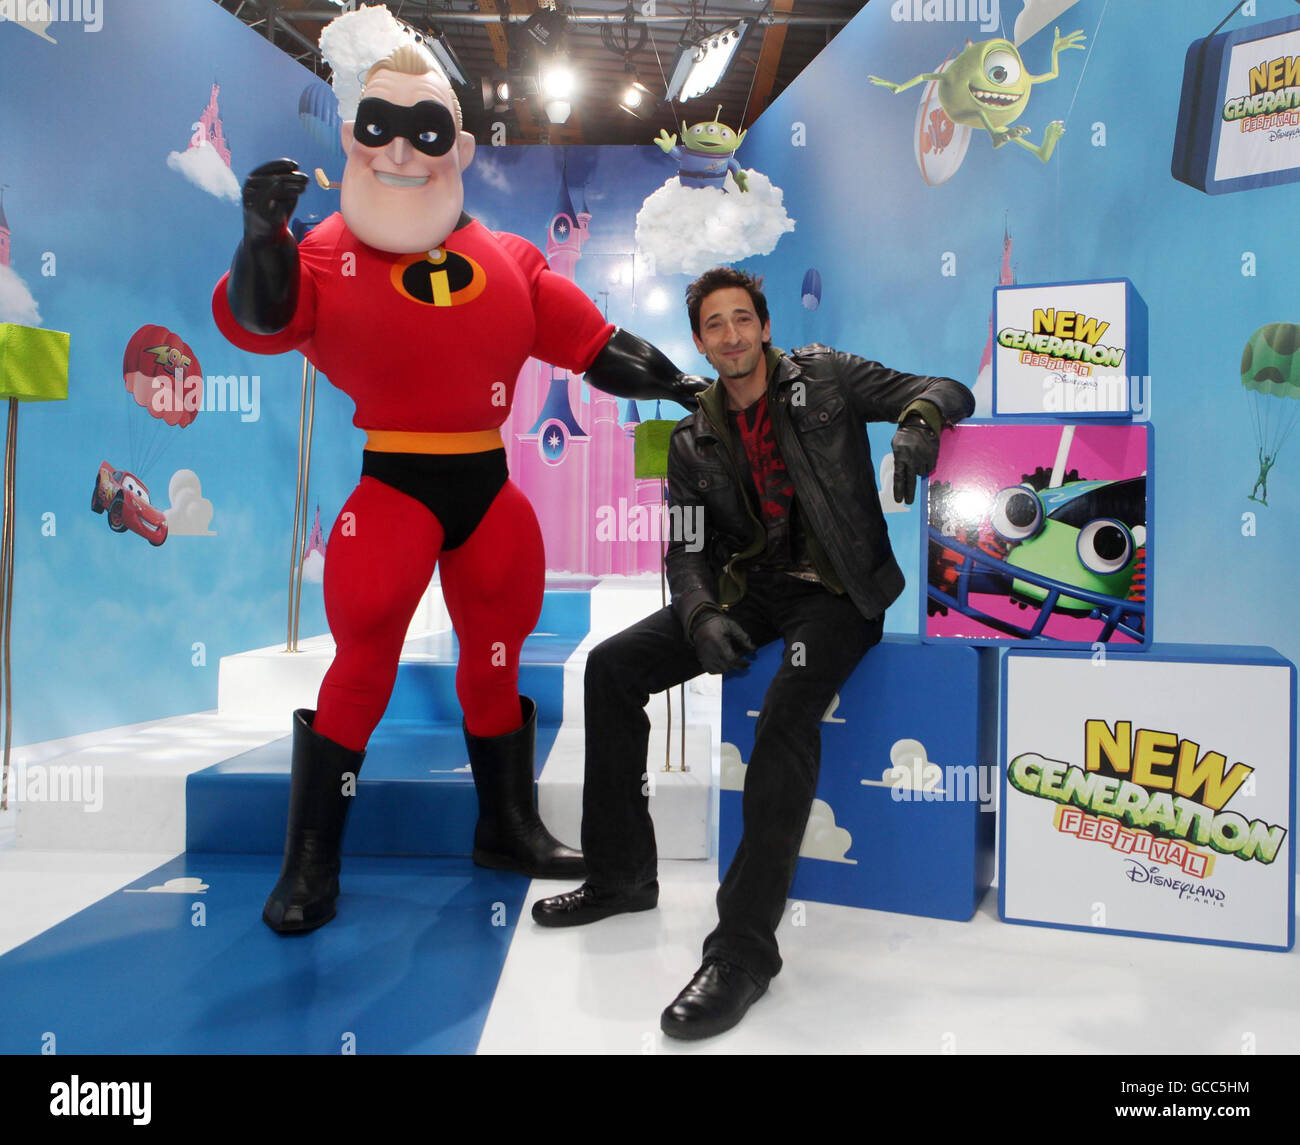 Adrien Brody (right) with a person dressed as the Disney character Mr Incredible at the New Generation Festival launch event at Disneyland Paris. Stock Photo